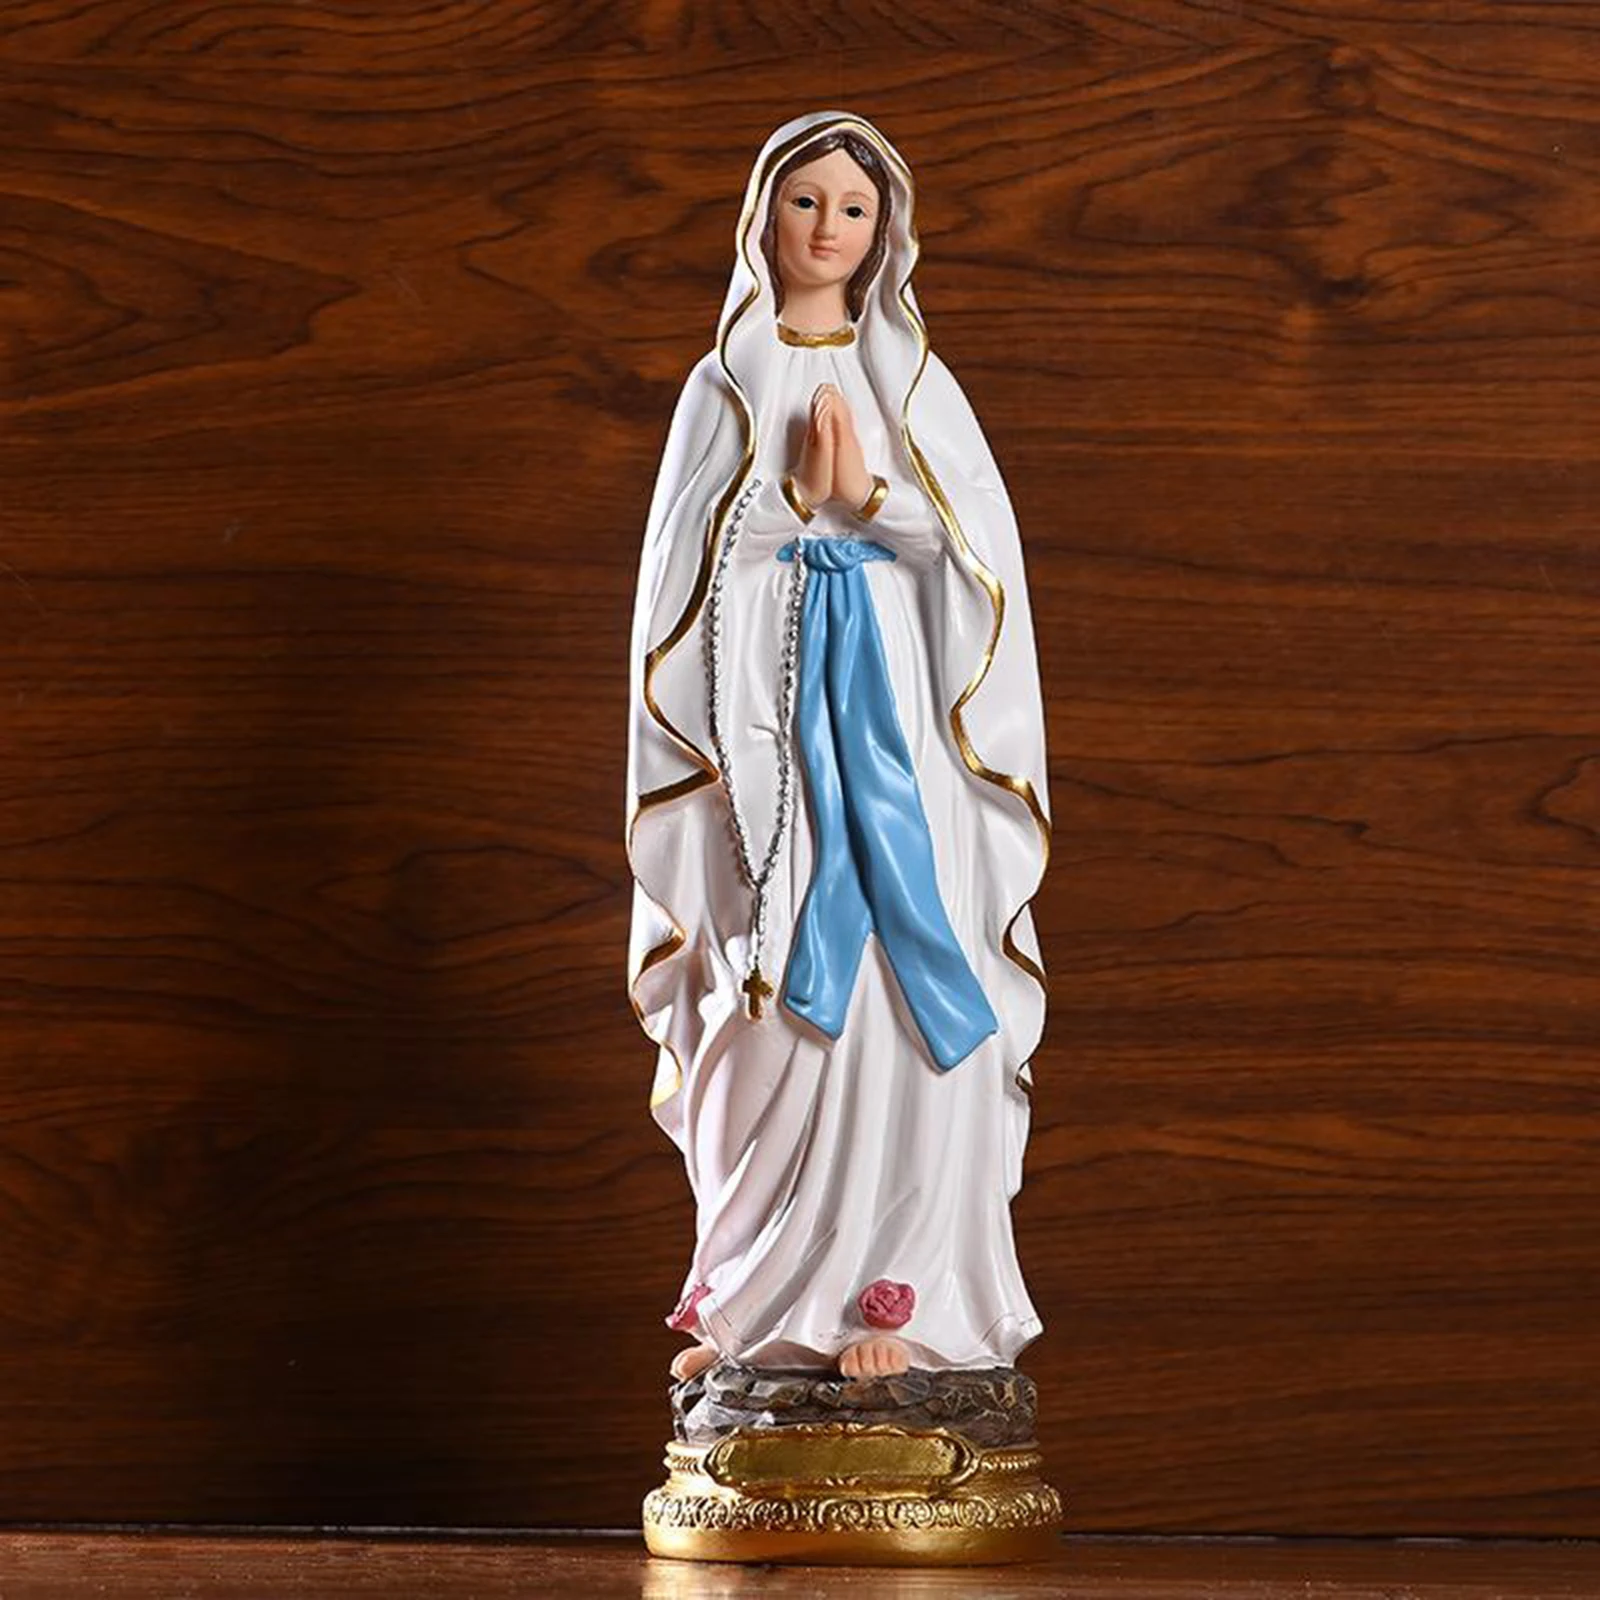 30cm Catholic Resin Our Lady of Lourdes Virgin Mary Statue Figure Home Gifts